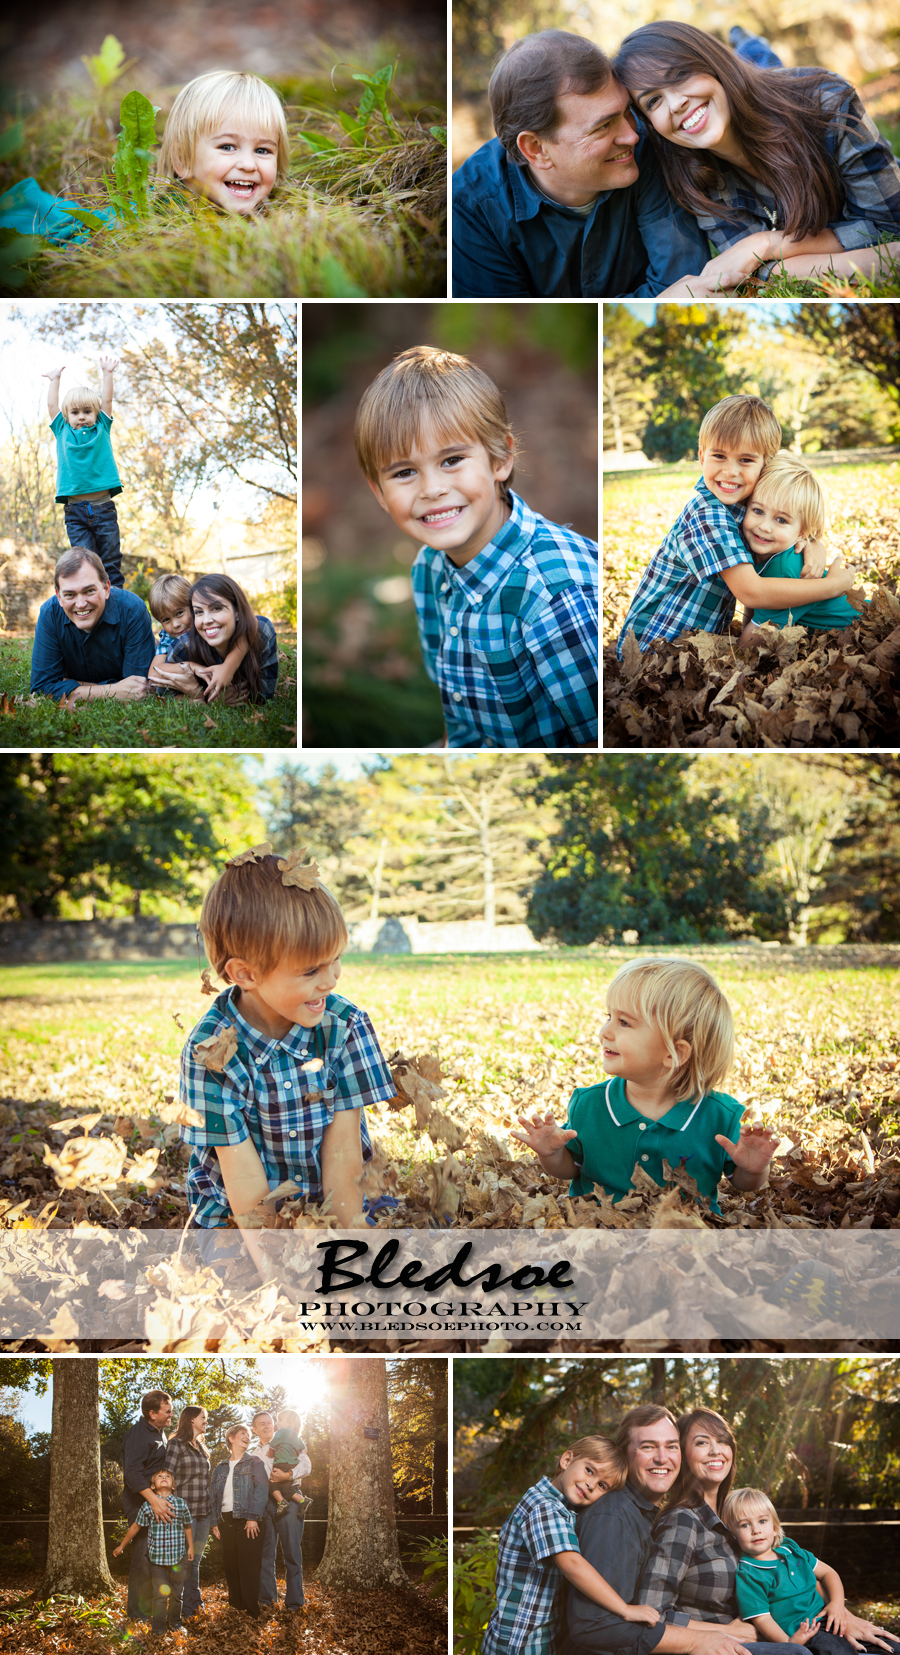 Baxley Family, Fall Family Portraits in Knoxville, © Bledsoe Photography